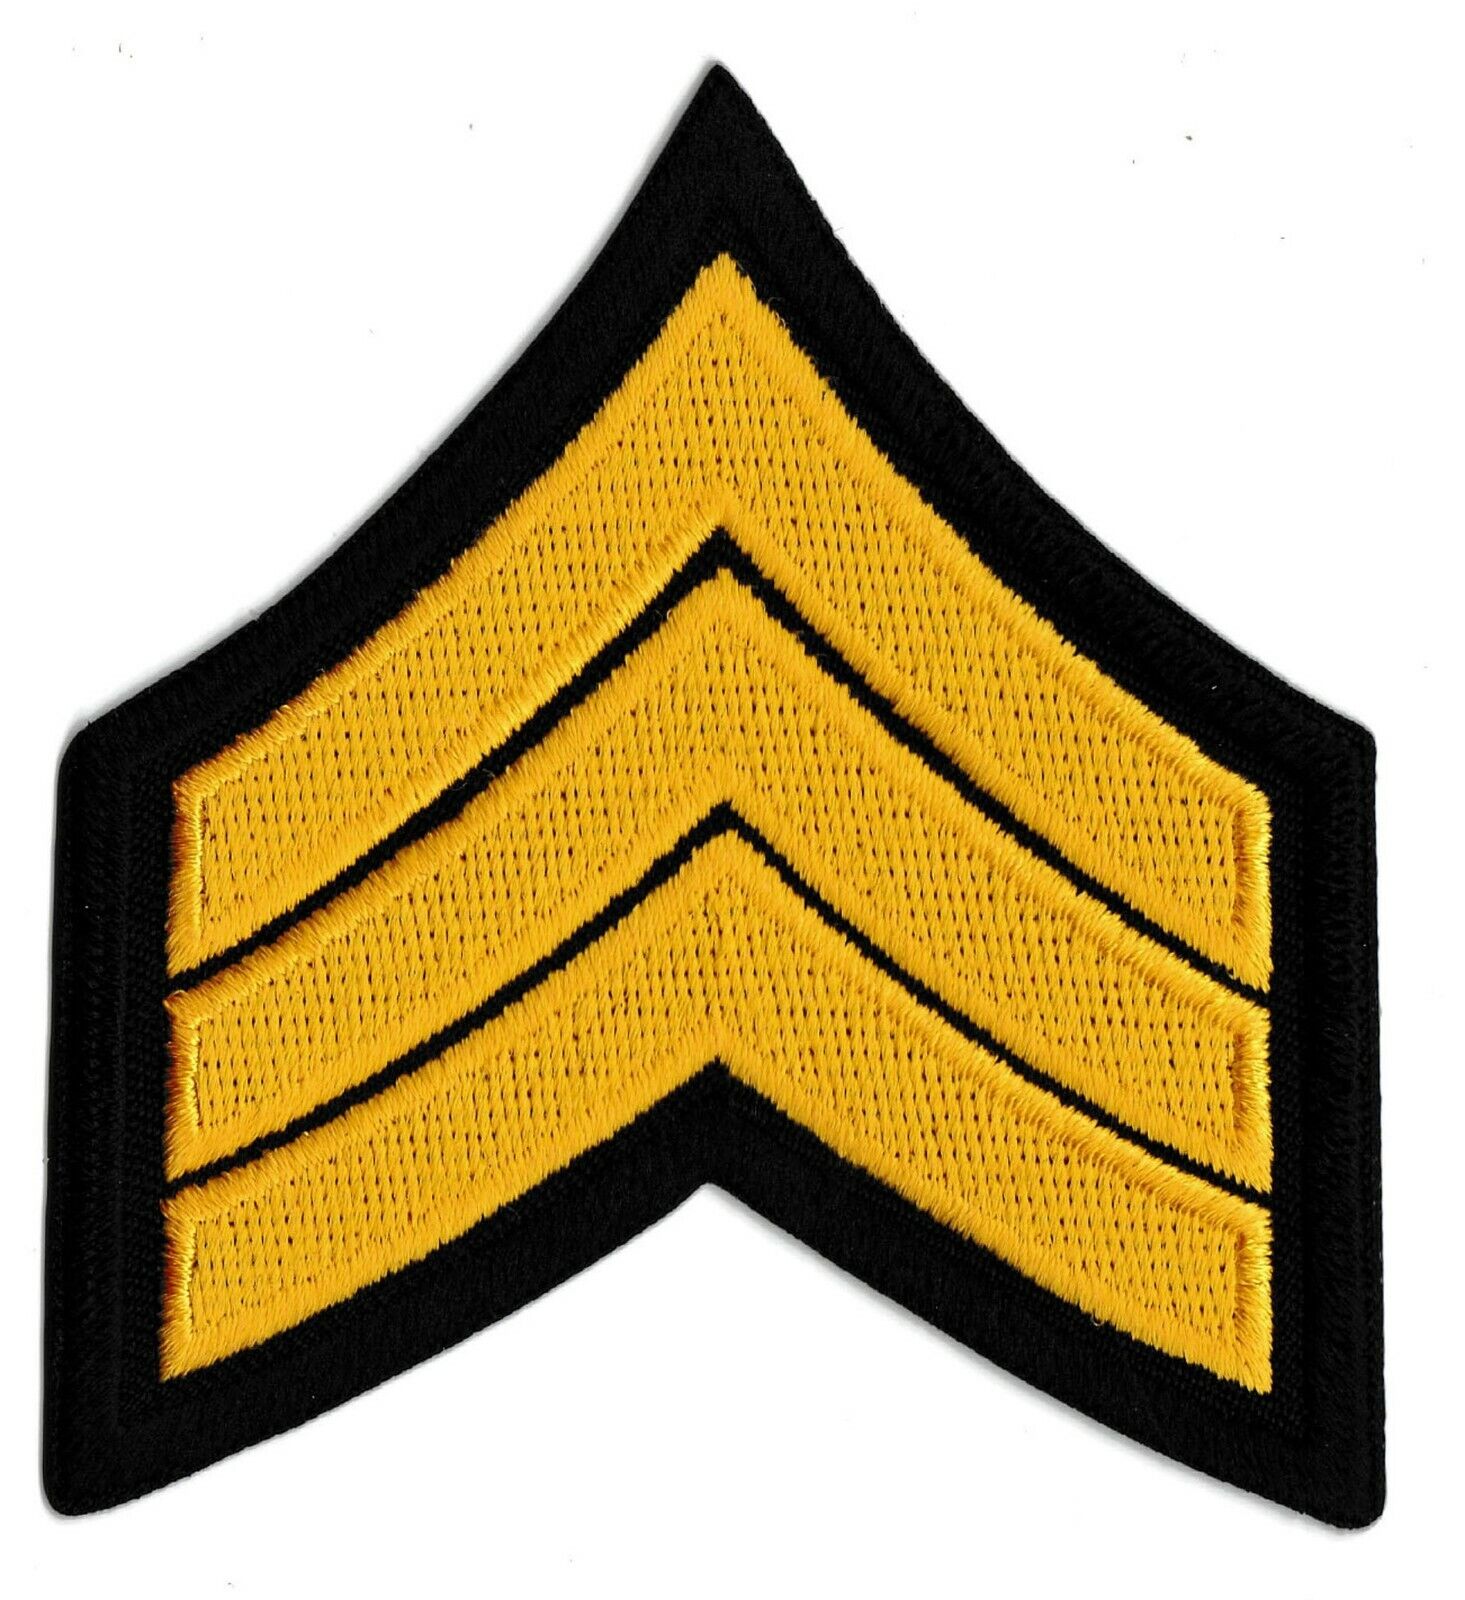 Ecusson patche staff sergeant US Army  Sergent thermocollant patch 